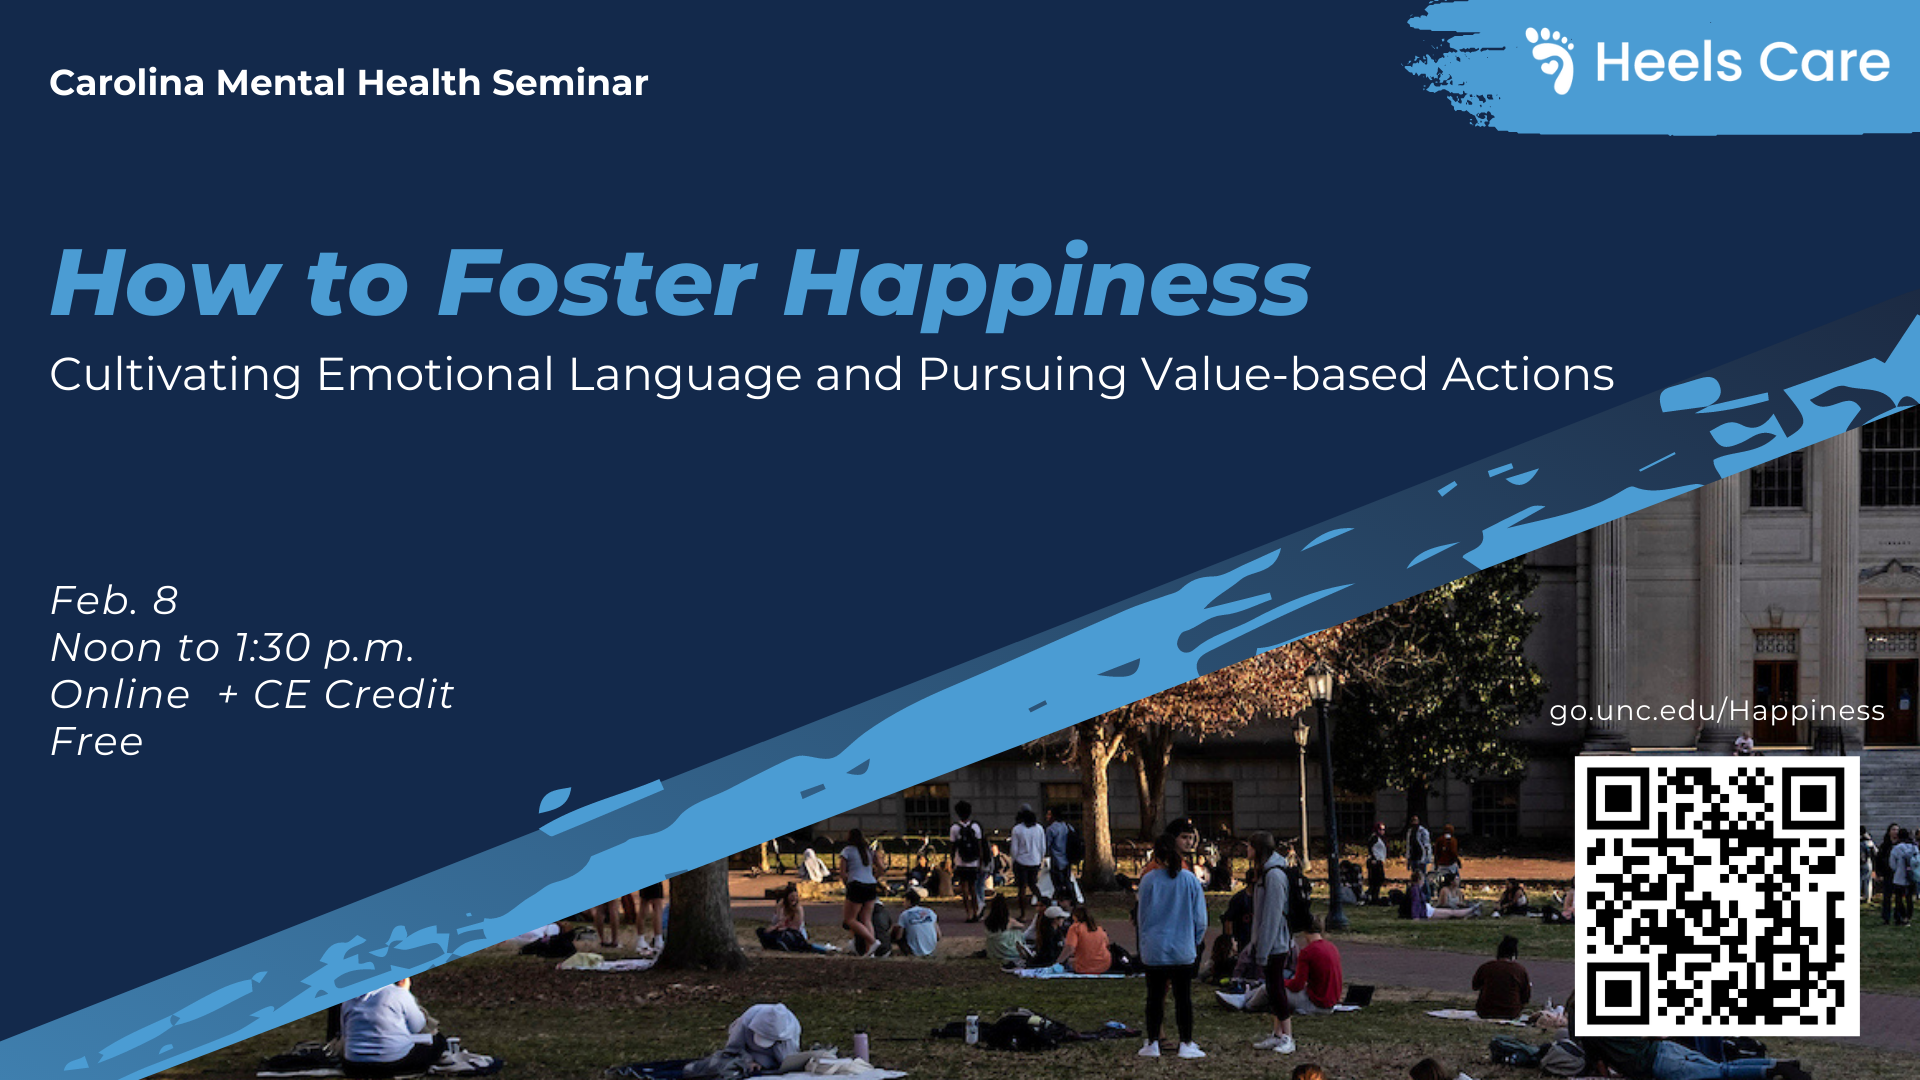 How to foster happiness - Feb 8 from noon - 1:30 pm